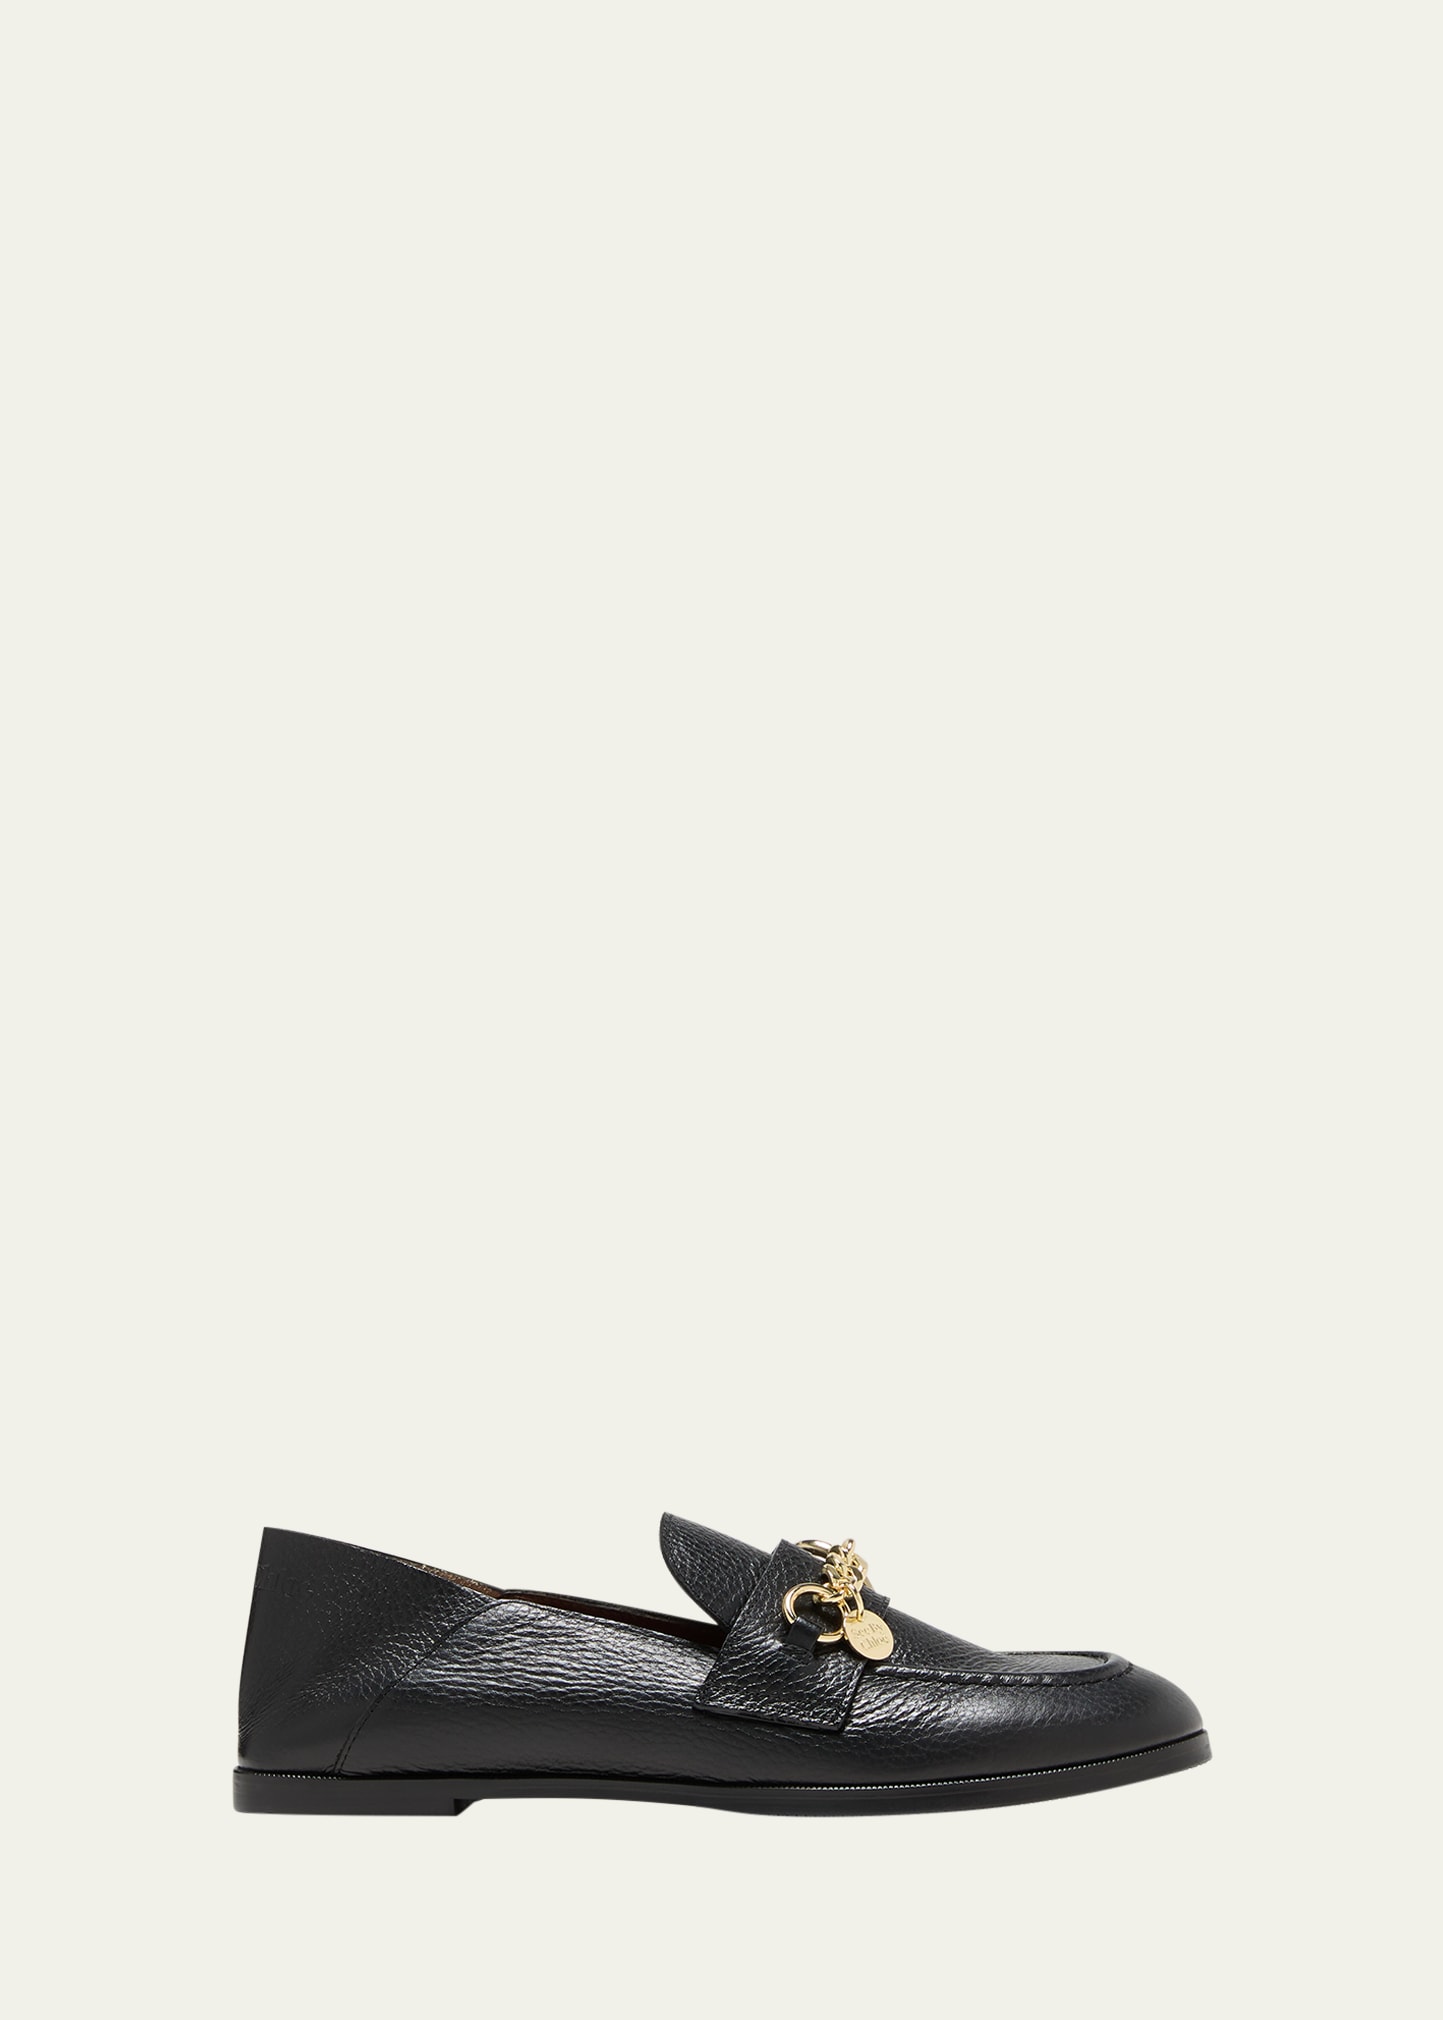 SEE BY CHLOÉ ARYEL LEATHER CHAIN LOAFERS